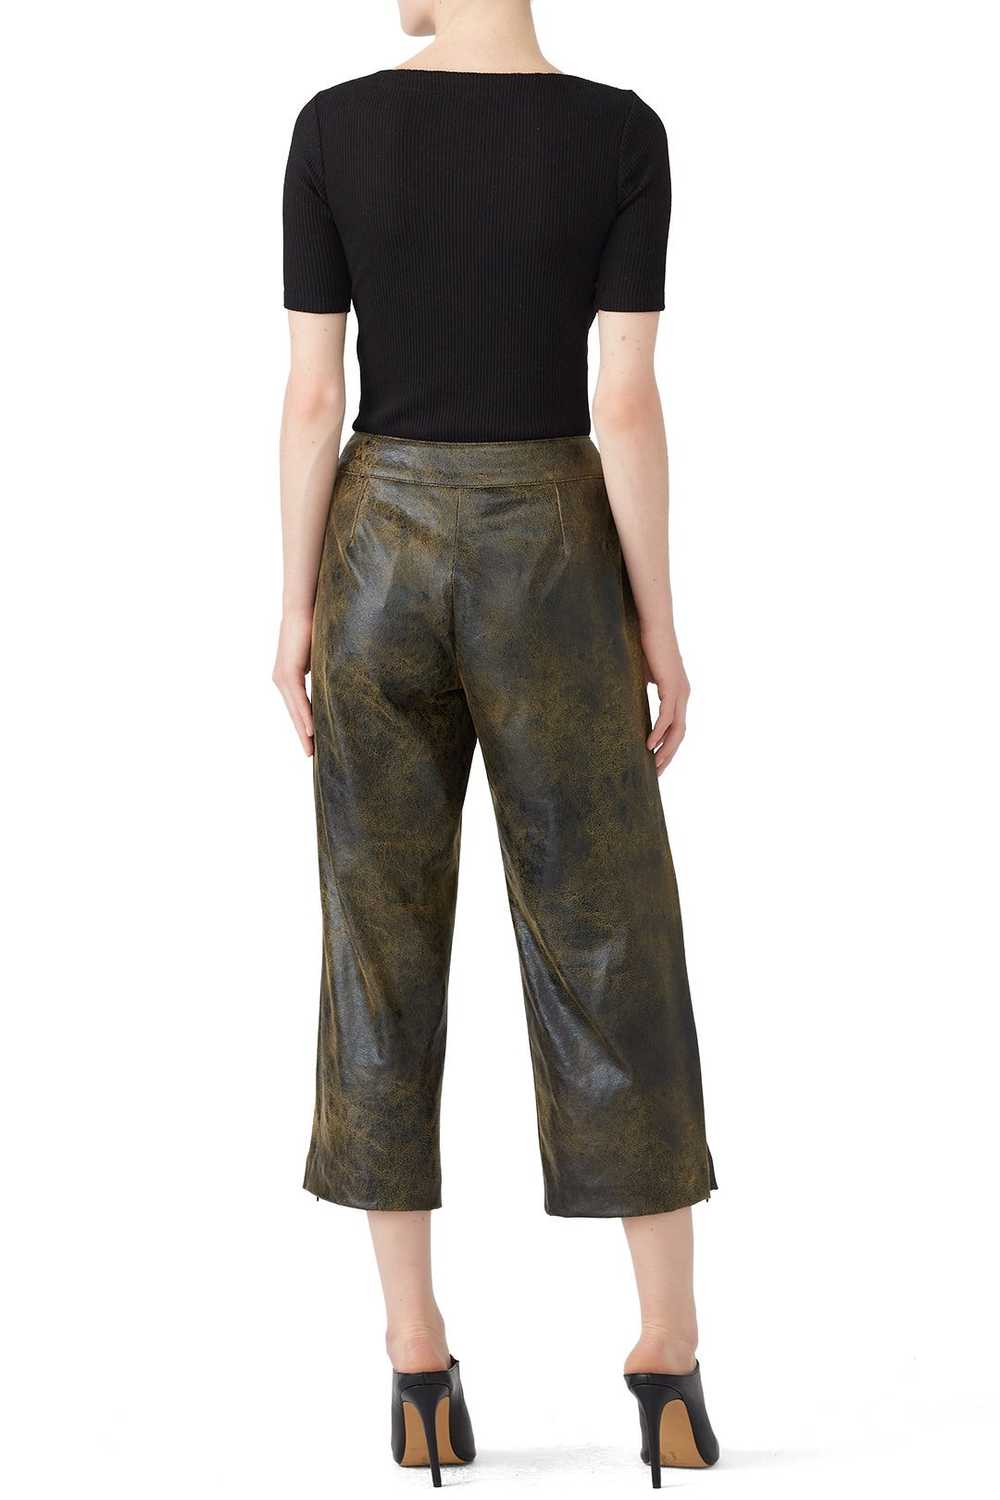 Snider Franz Faux Leather Gaucho Pants - image 2